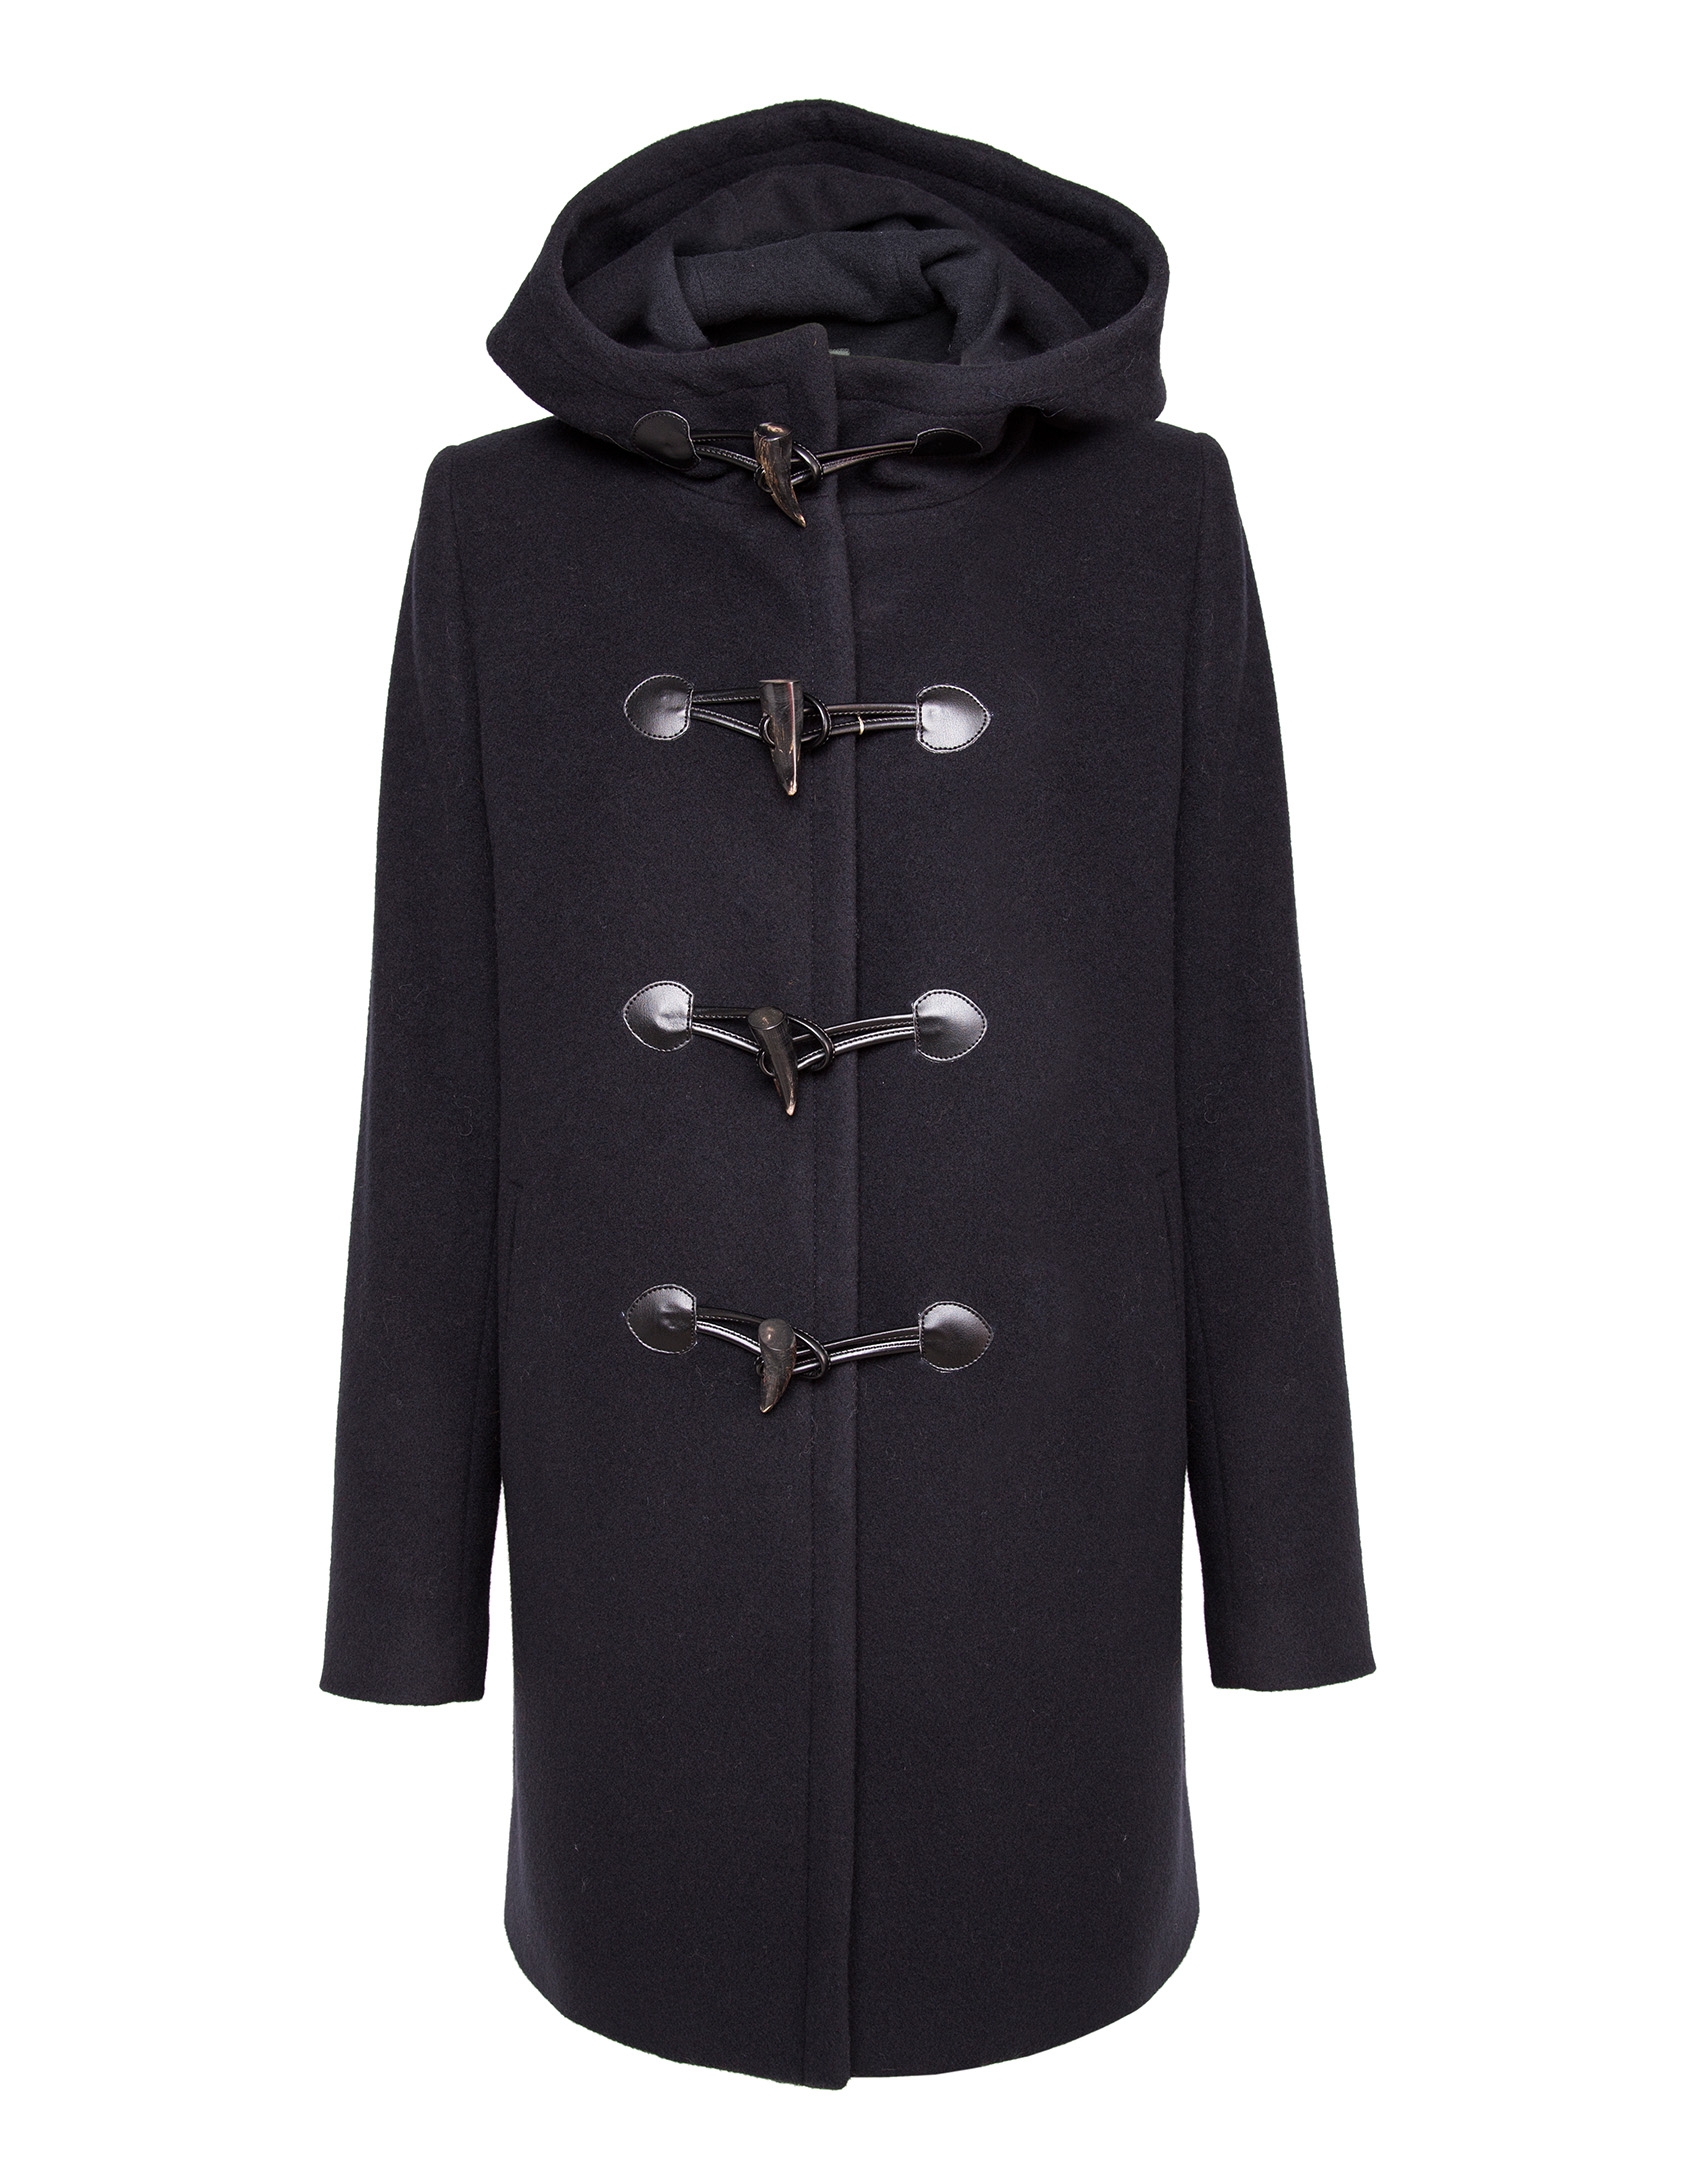 Navy blue trench coat with hood